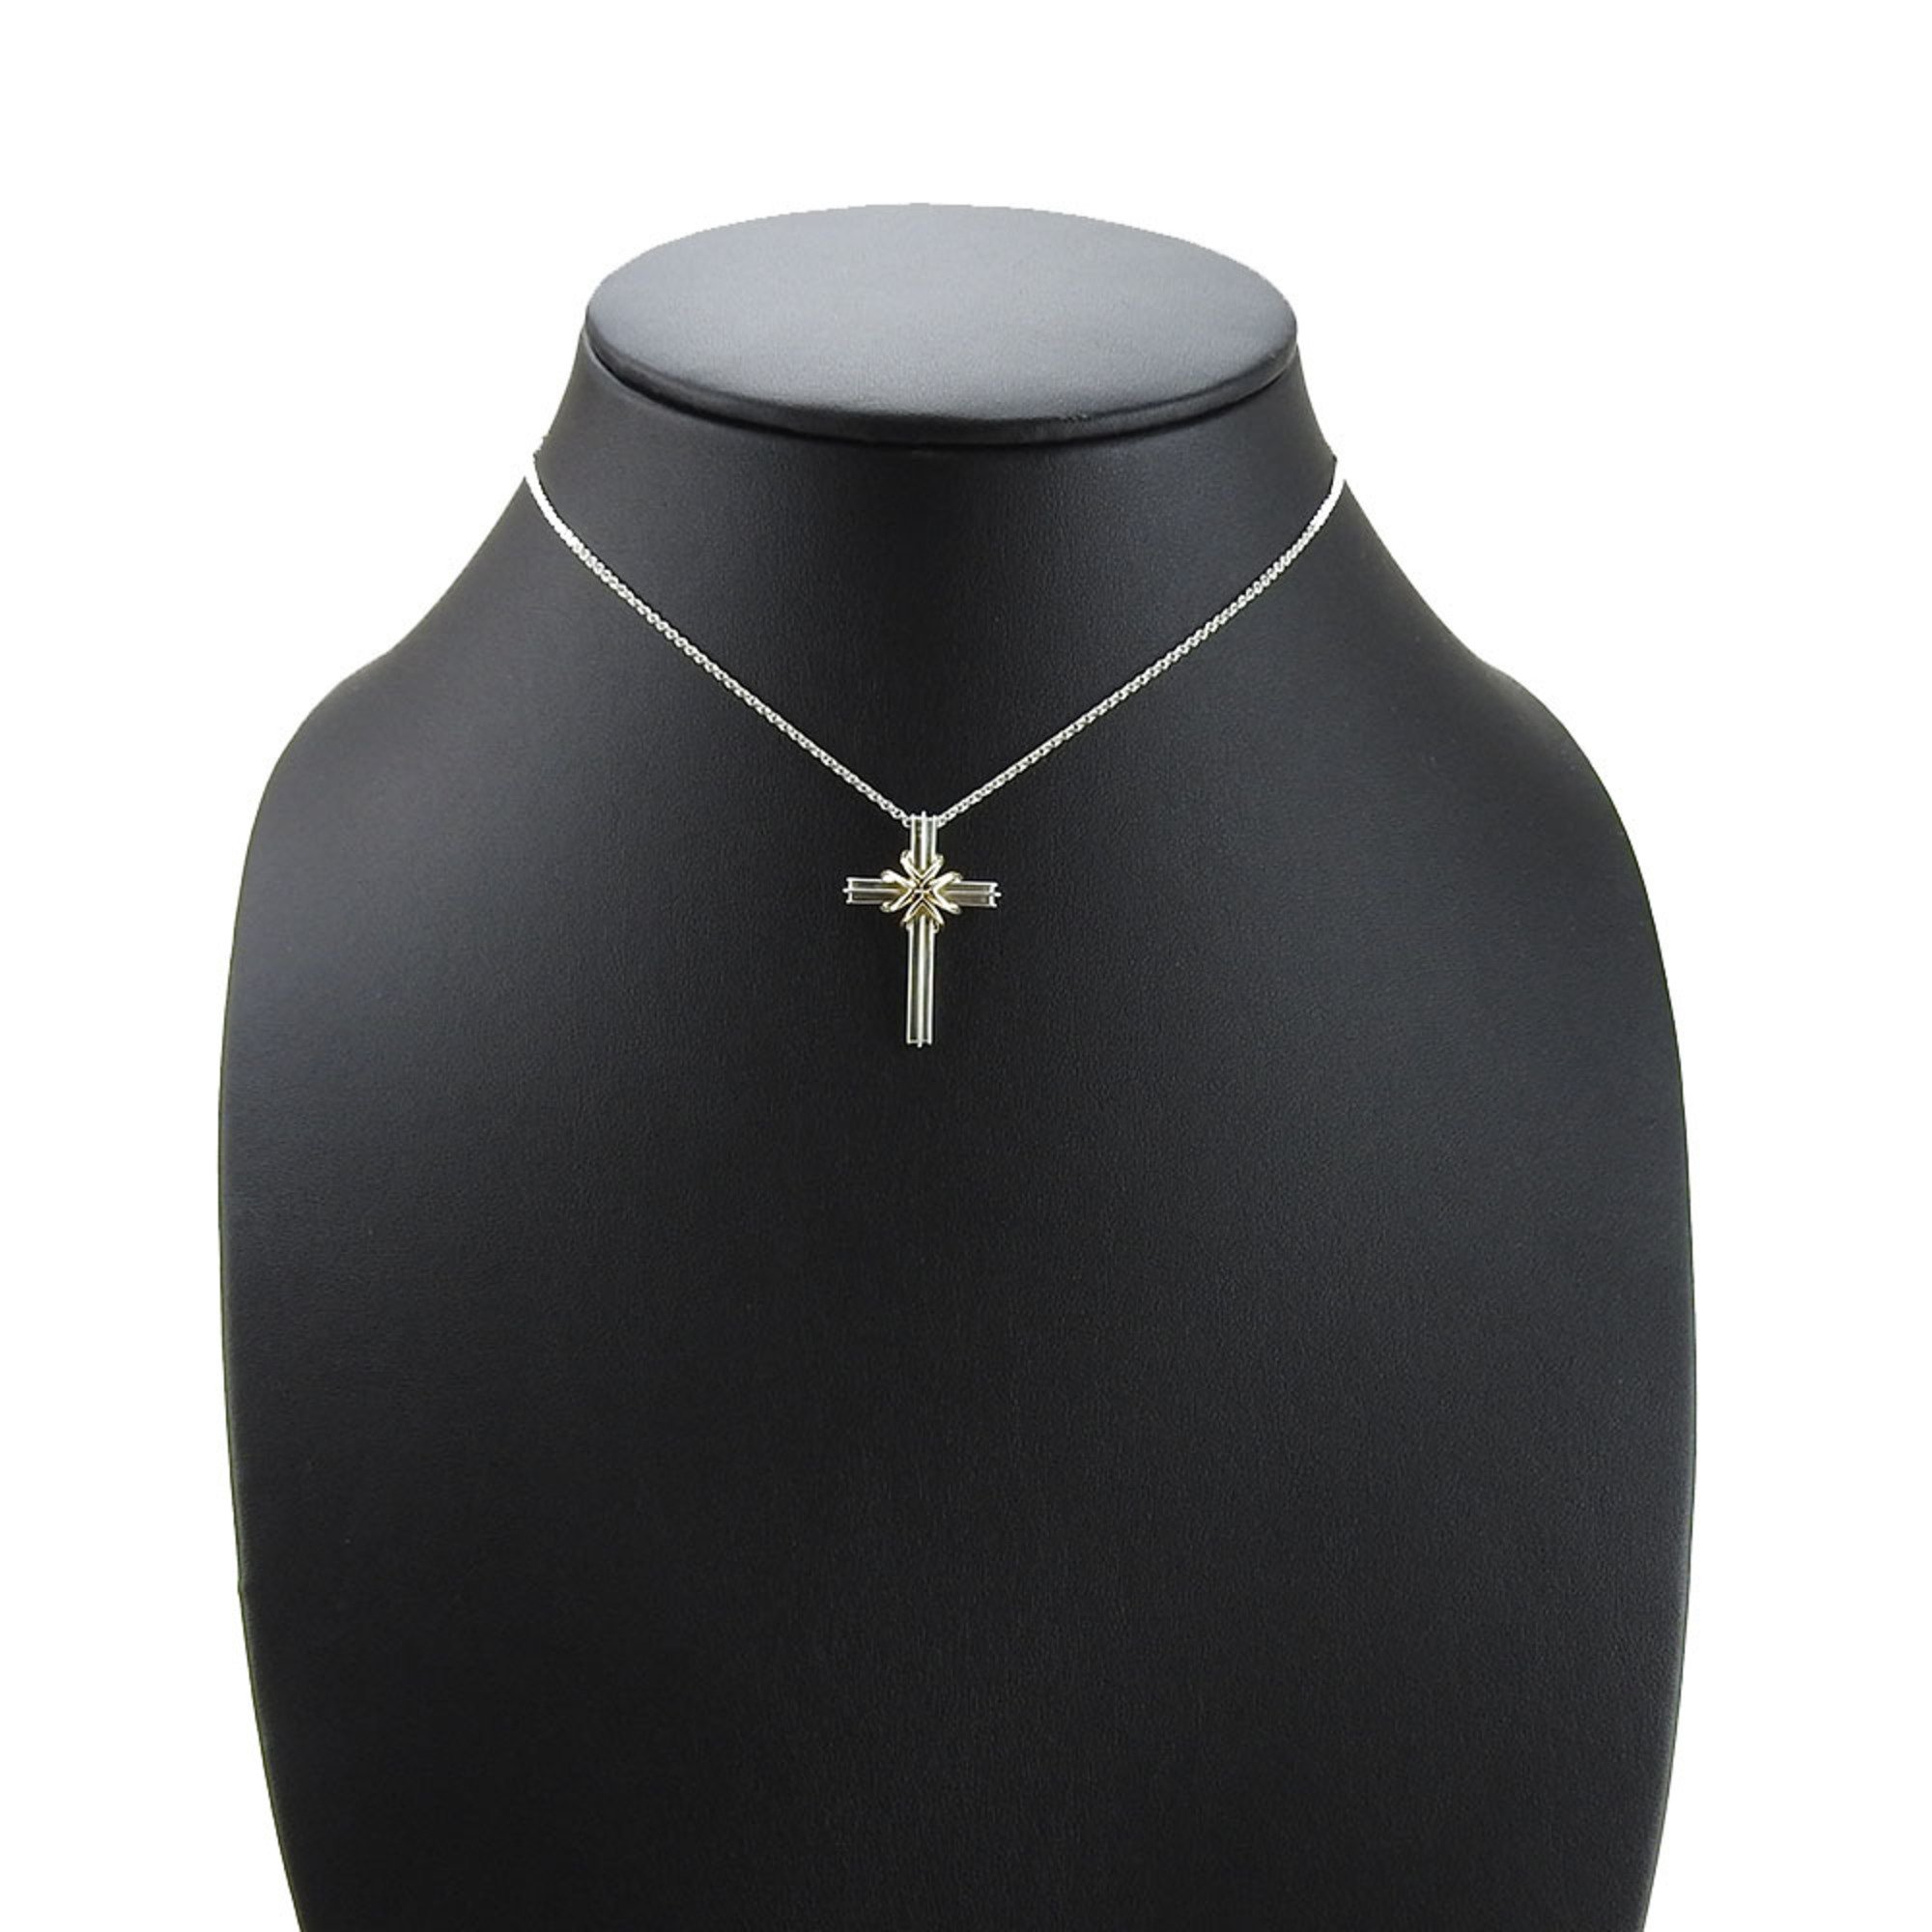 Tiffany Necklace Signature Cross Silver 925 K18YG Approx. 7.2g Women's TIFFANY&Co.